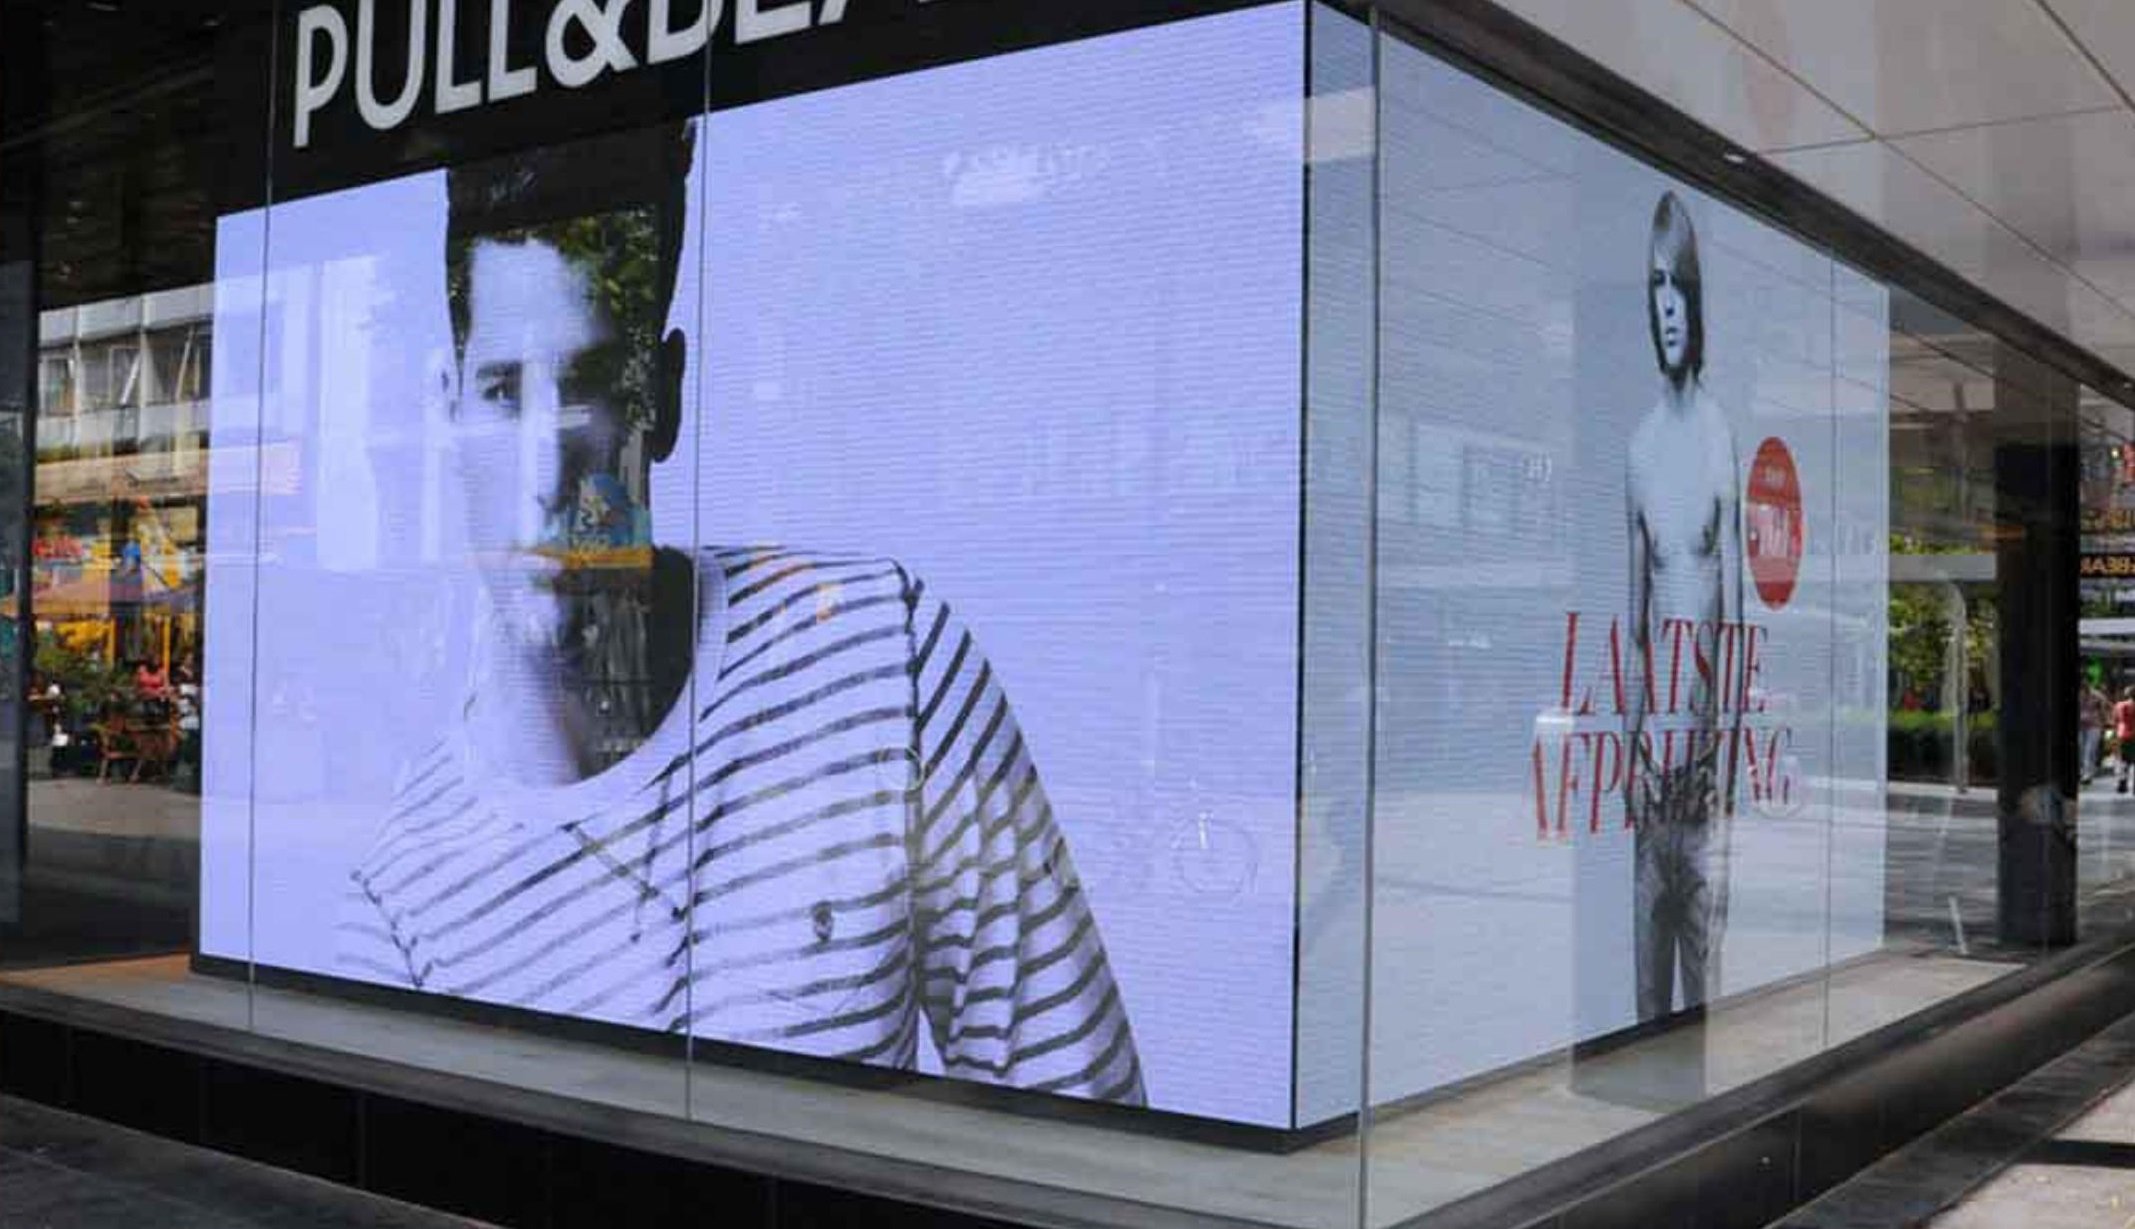 Digital LED Screens Transparent Fixed Panels for pull and bear